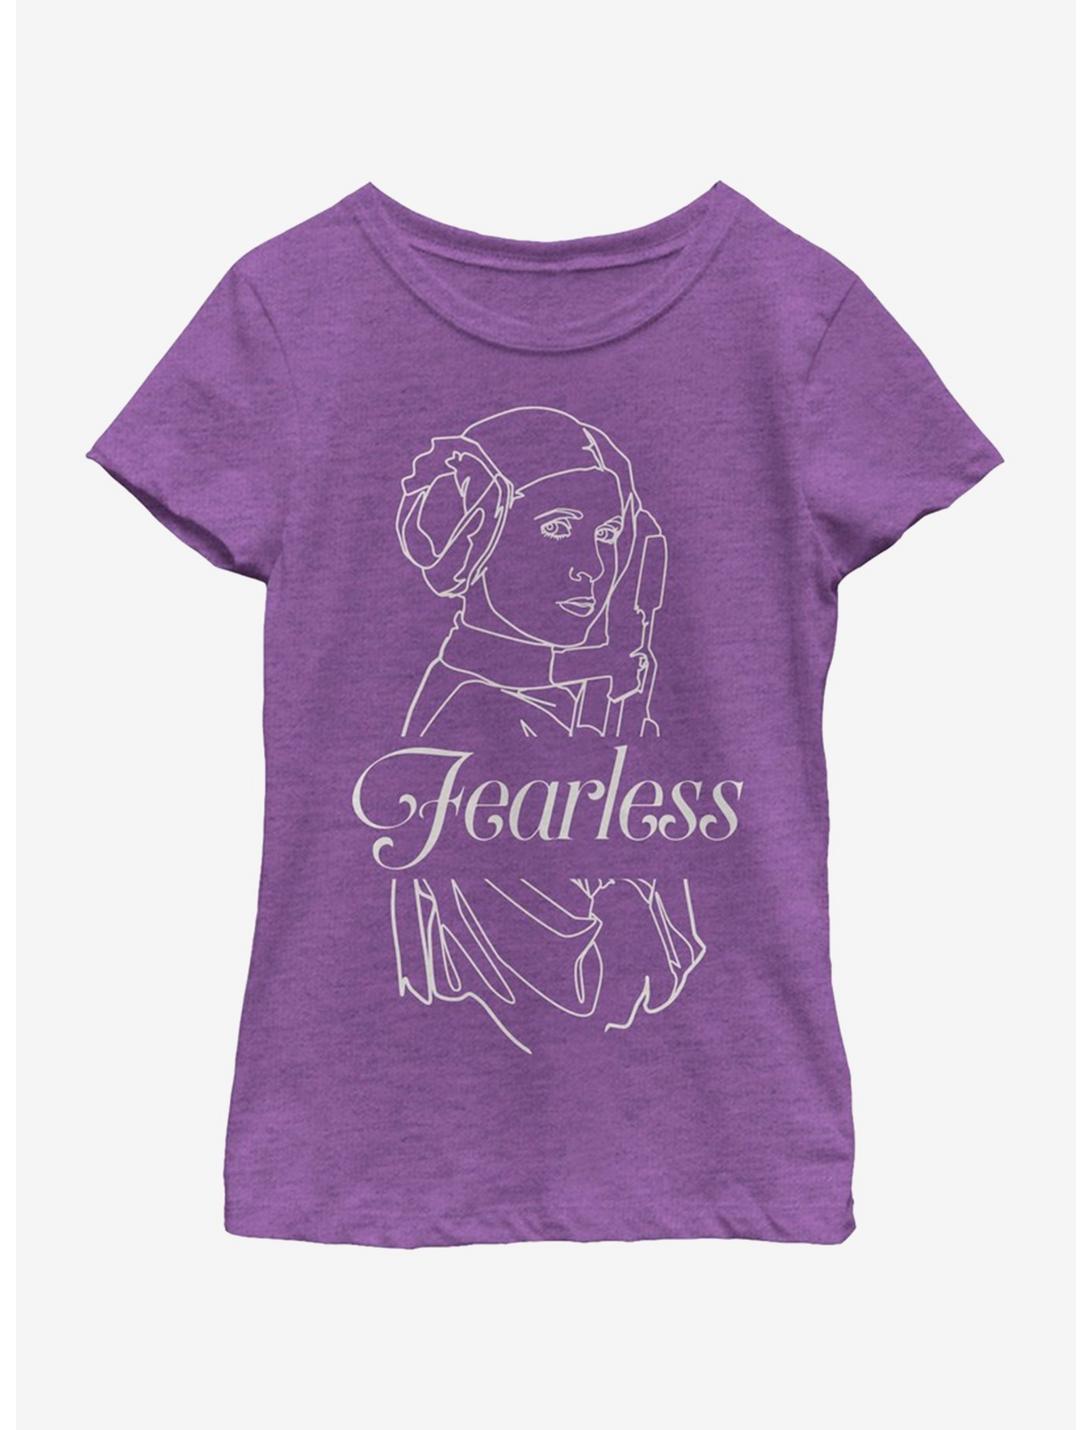 Star Wars Fearless Leia Youth Girls T-Shirt, PURPLE BERRY, hi-res